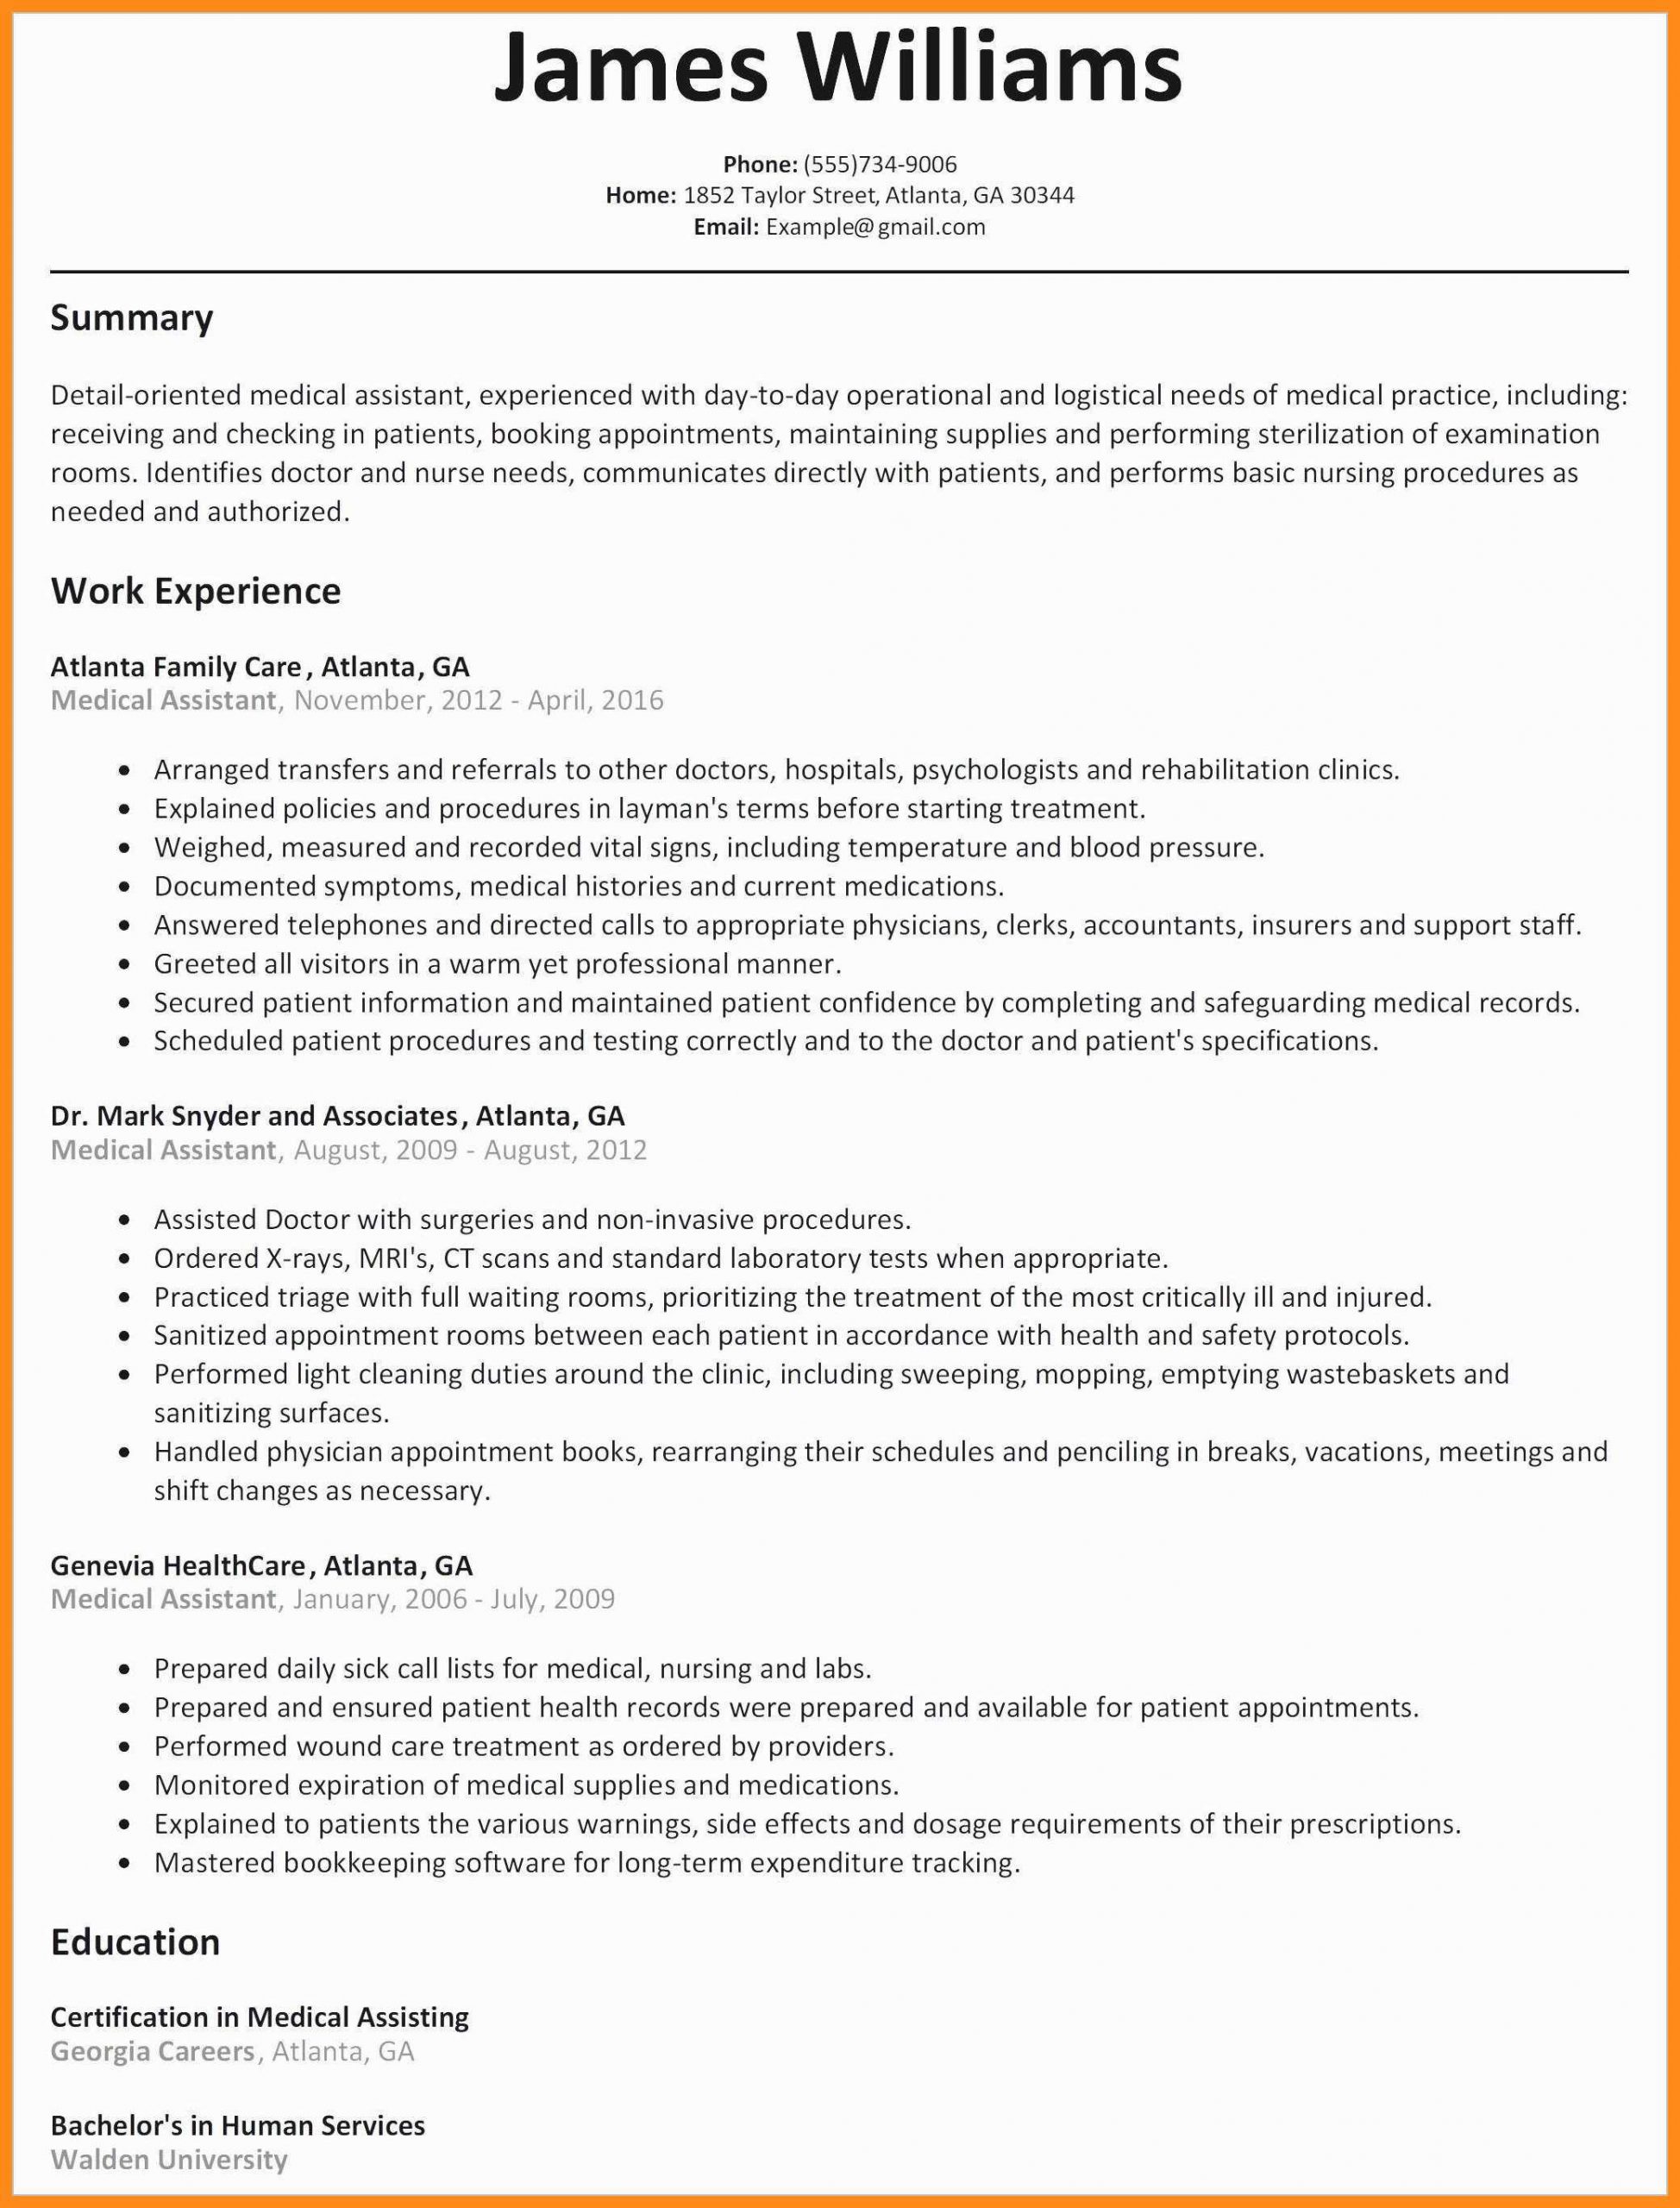 Sample Resume for Experienced Mobile Application Testing 12 13 Mobile Application Testing Resumes